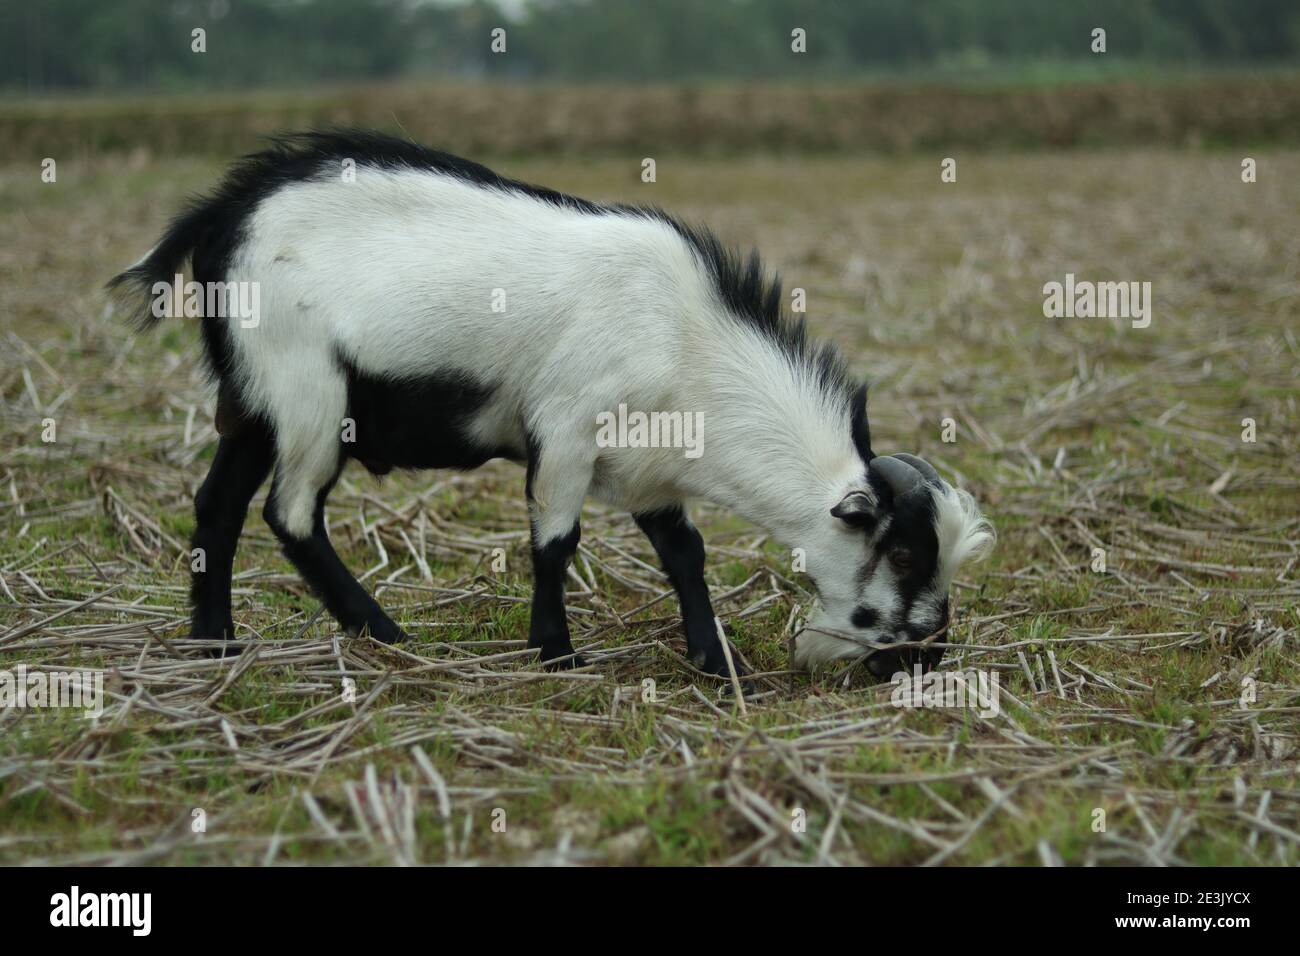 A Black & White Goat take a grass on the field Stock Photo